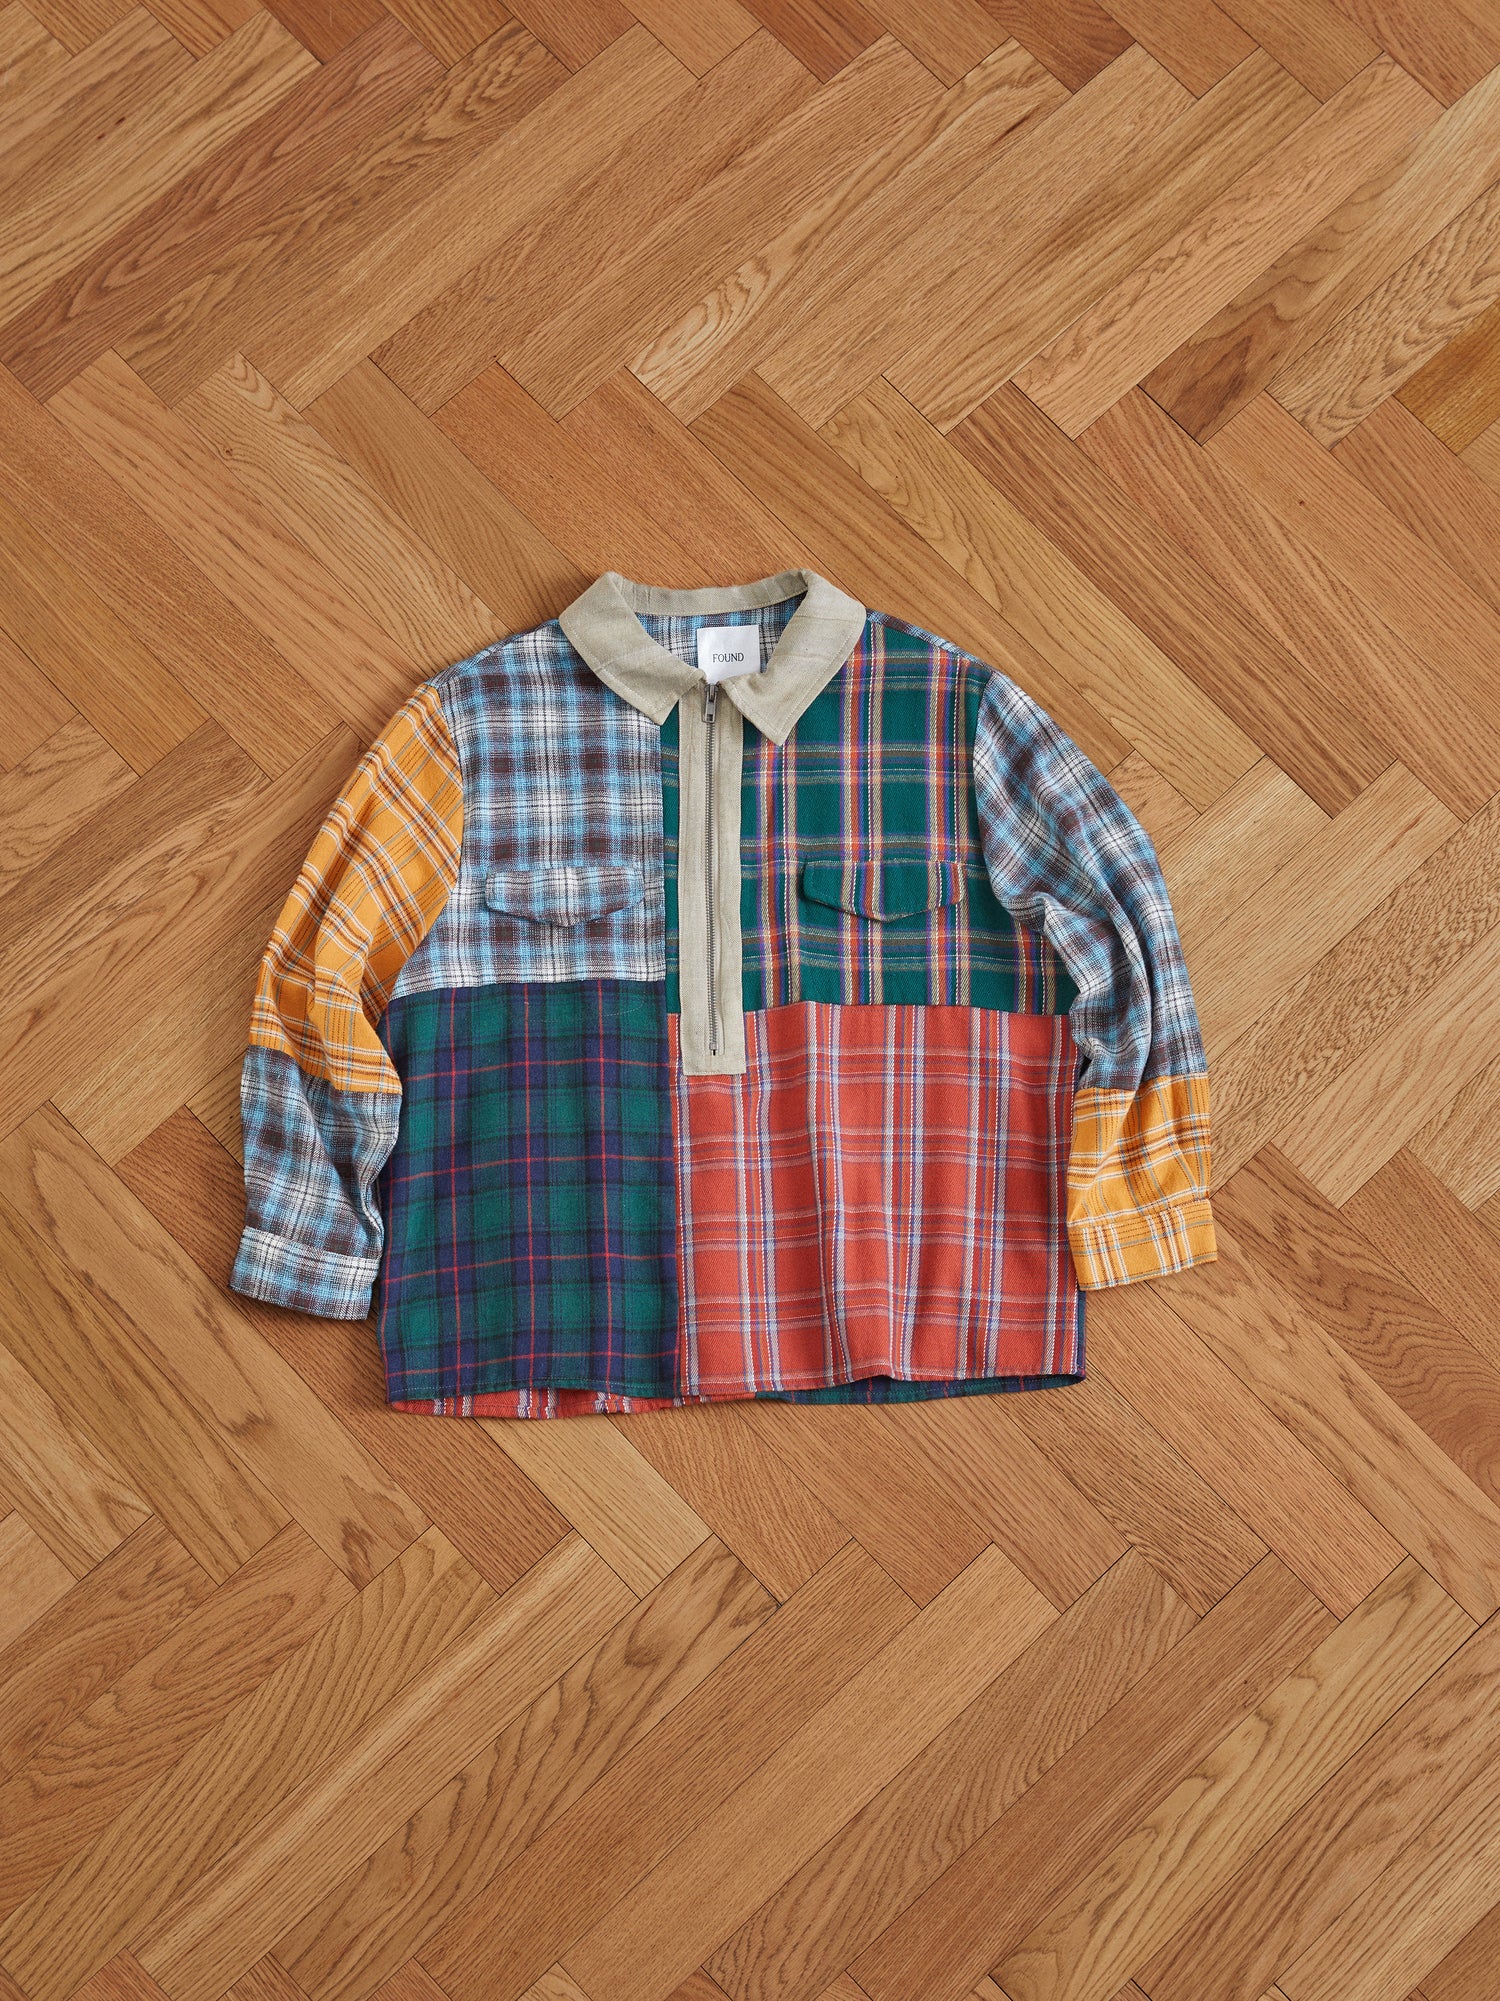 A Found Multi Plaid Tartan Shirt with handcrafted distressing laying on a wooden floor.